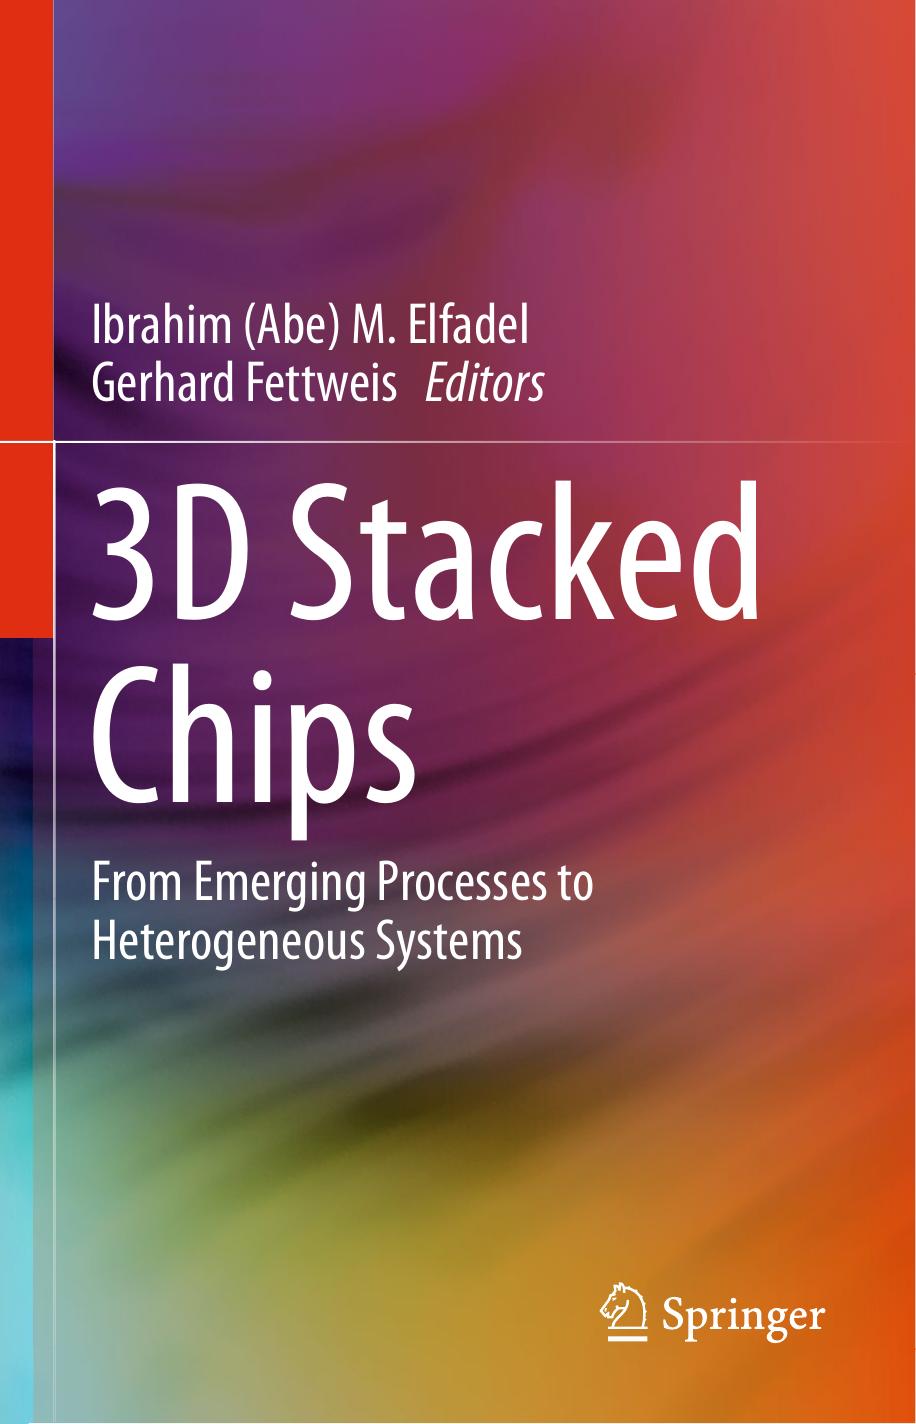 (eBook PDF)3D Stacked Chips From Emerging Processes to Heterogeneous Systems by Ibrahim (Abe) M. Elfadel,Gerhard Fettweis